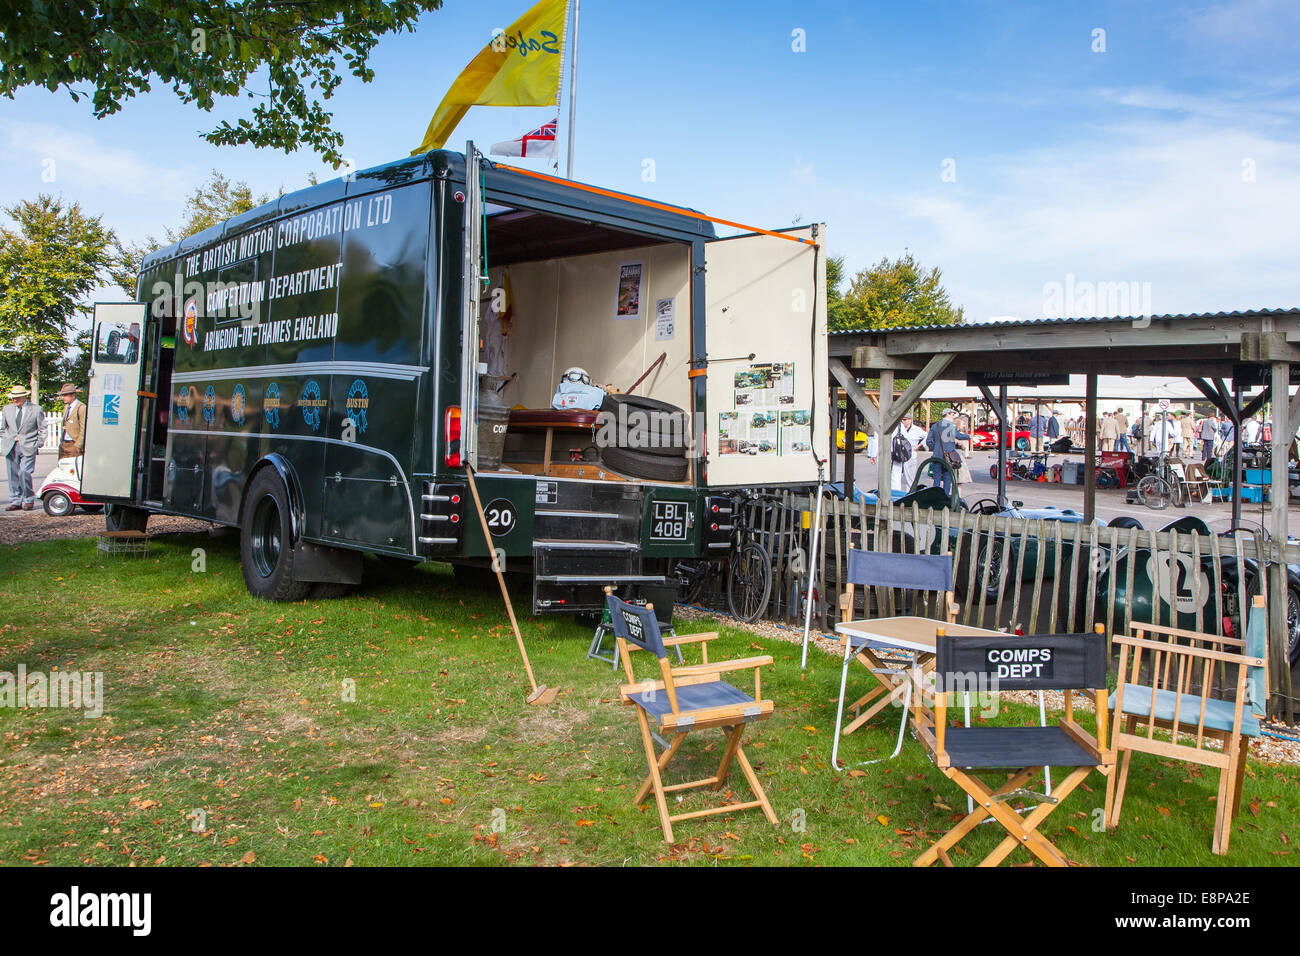 Classic vintage BMC Competition support van at the Goodwood Revival 2014, West Sussex, UK Stock Photo